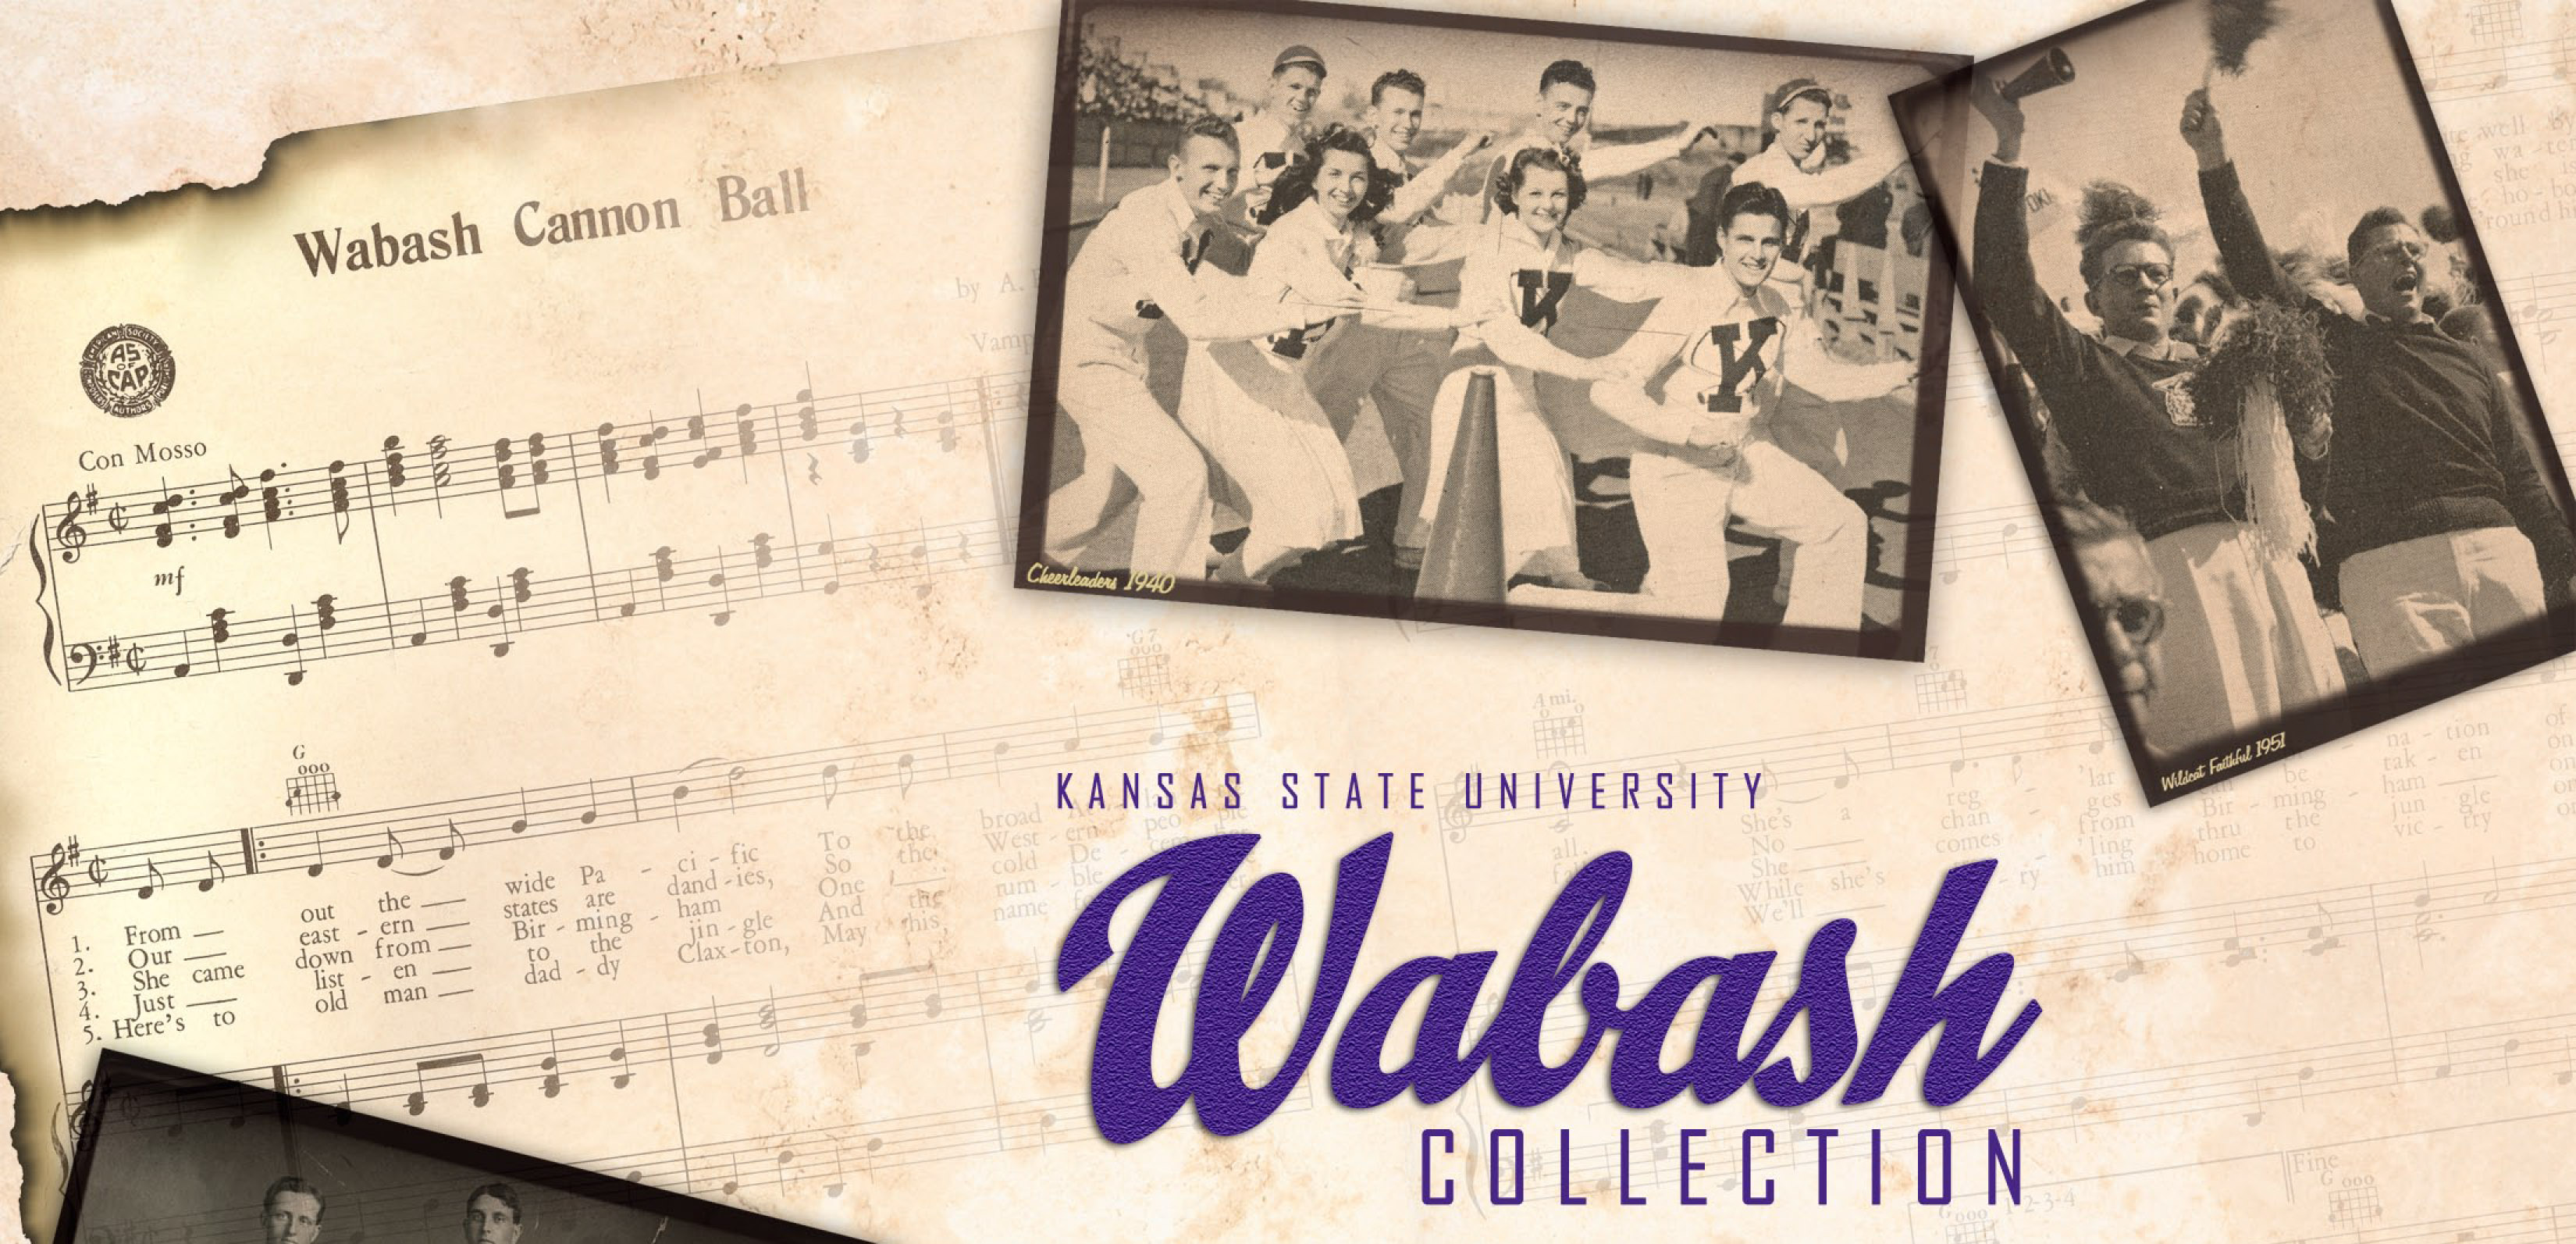 Wabash Collection Graphic